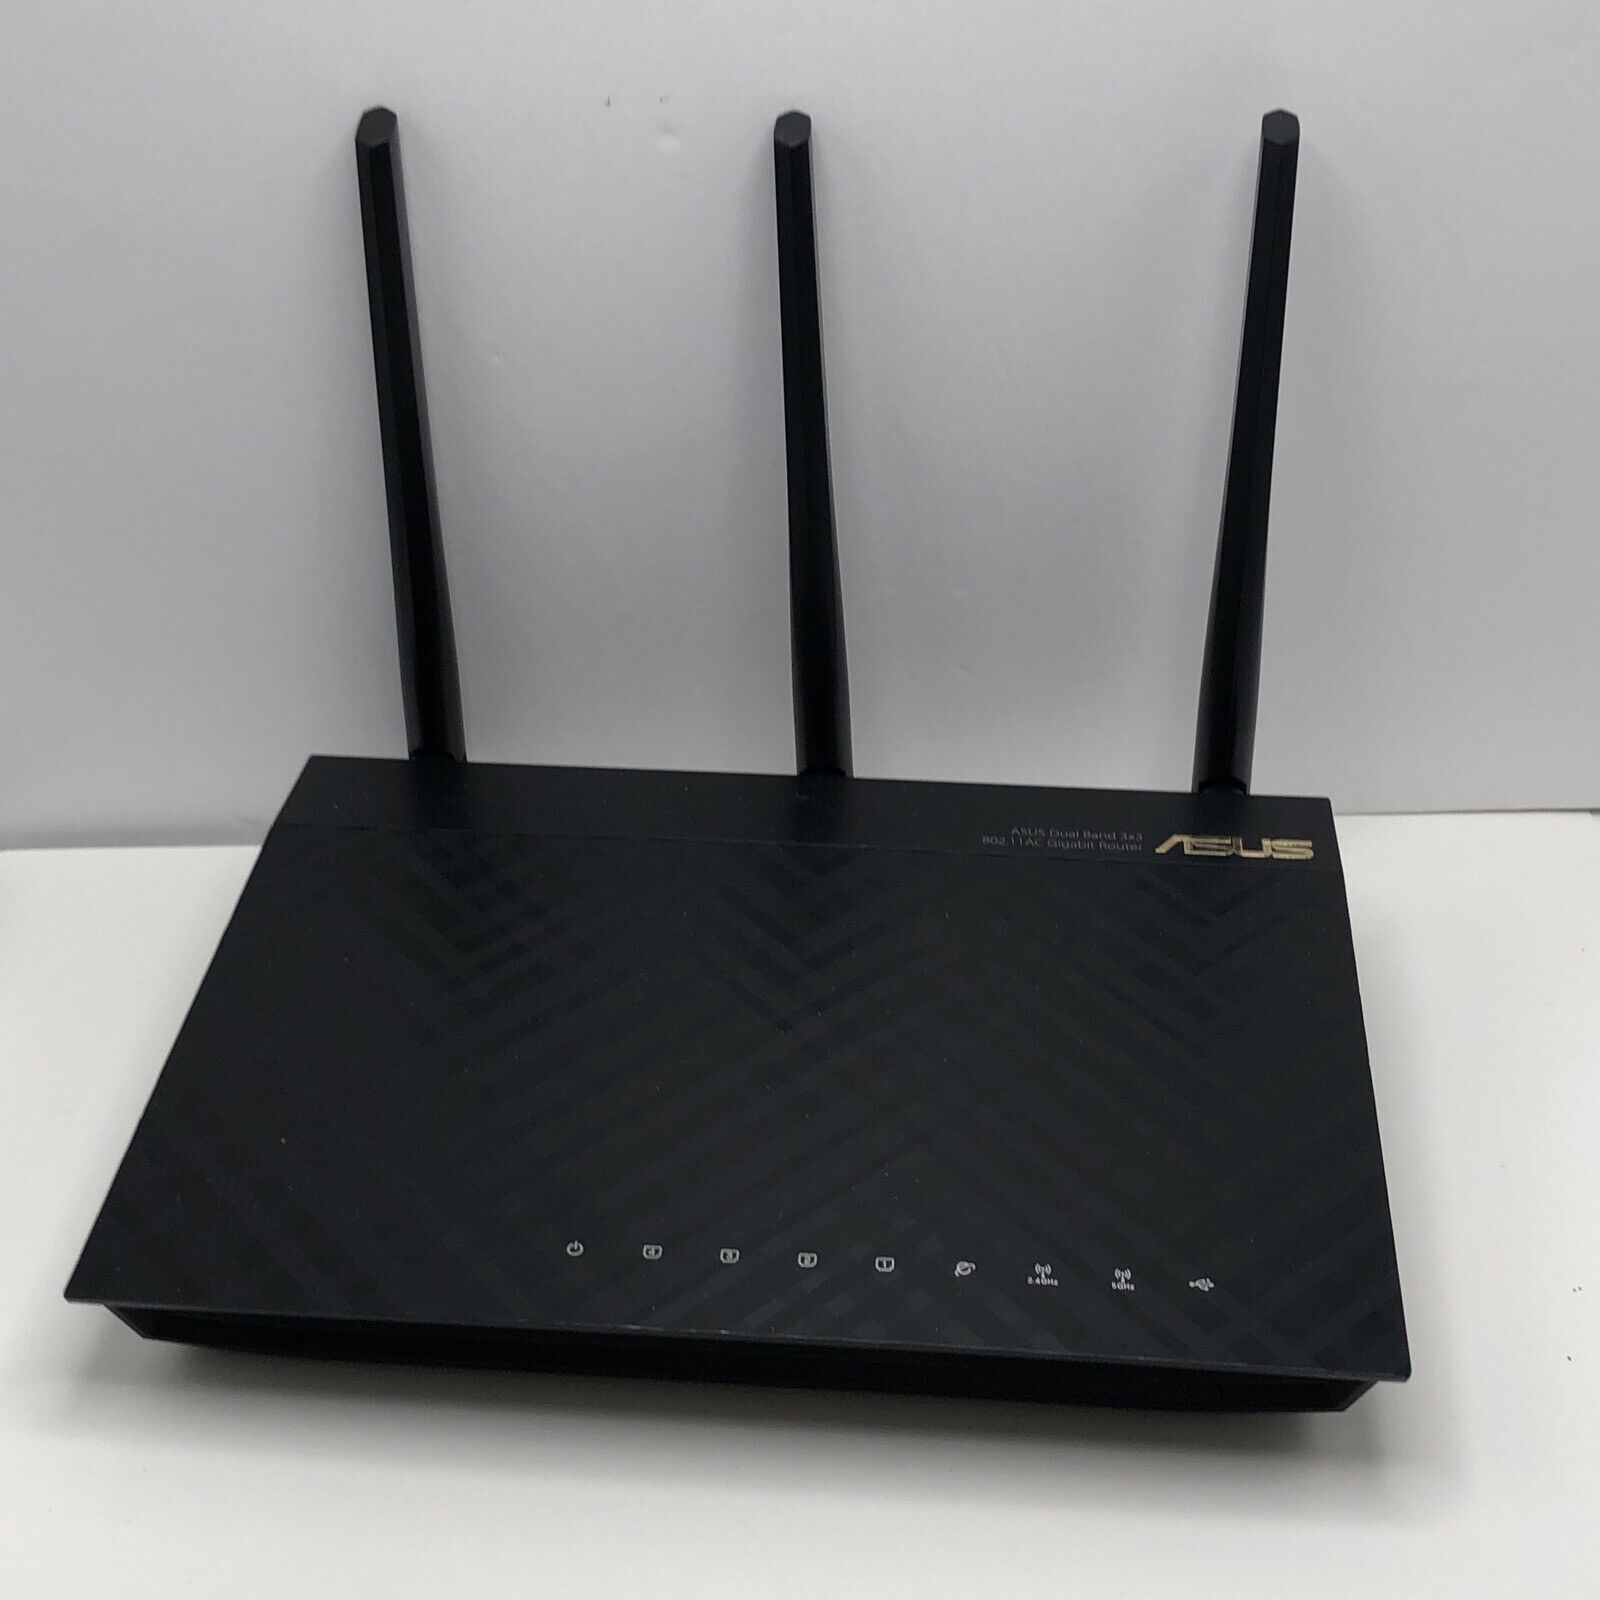 Asus RT-AC66R Gigabit Router Only | No Power Cord